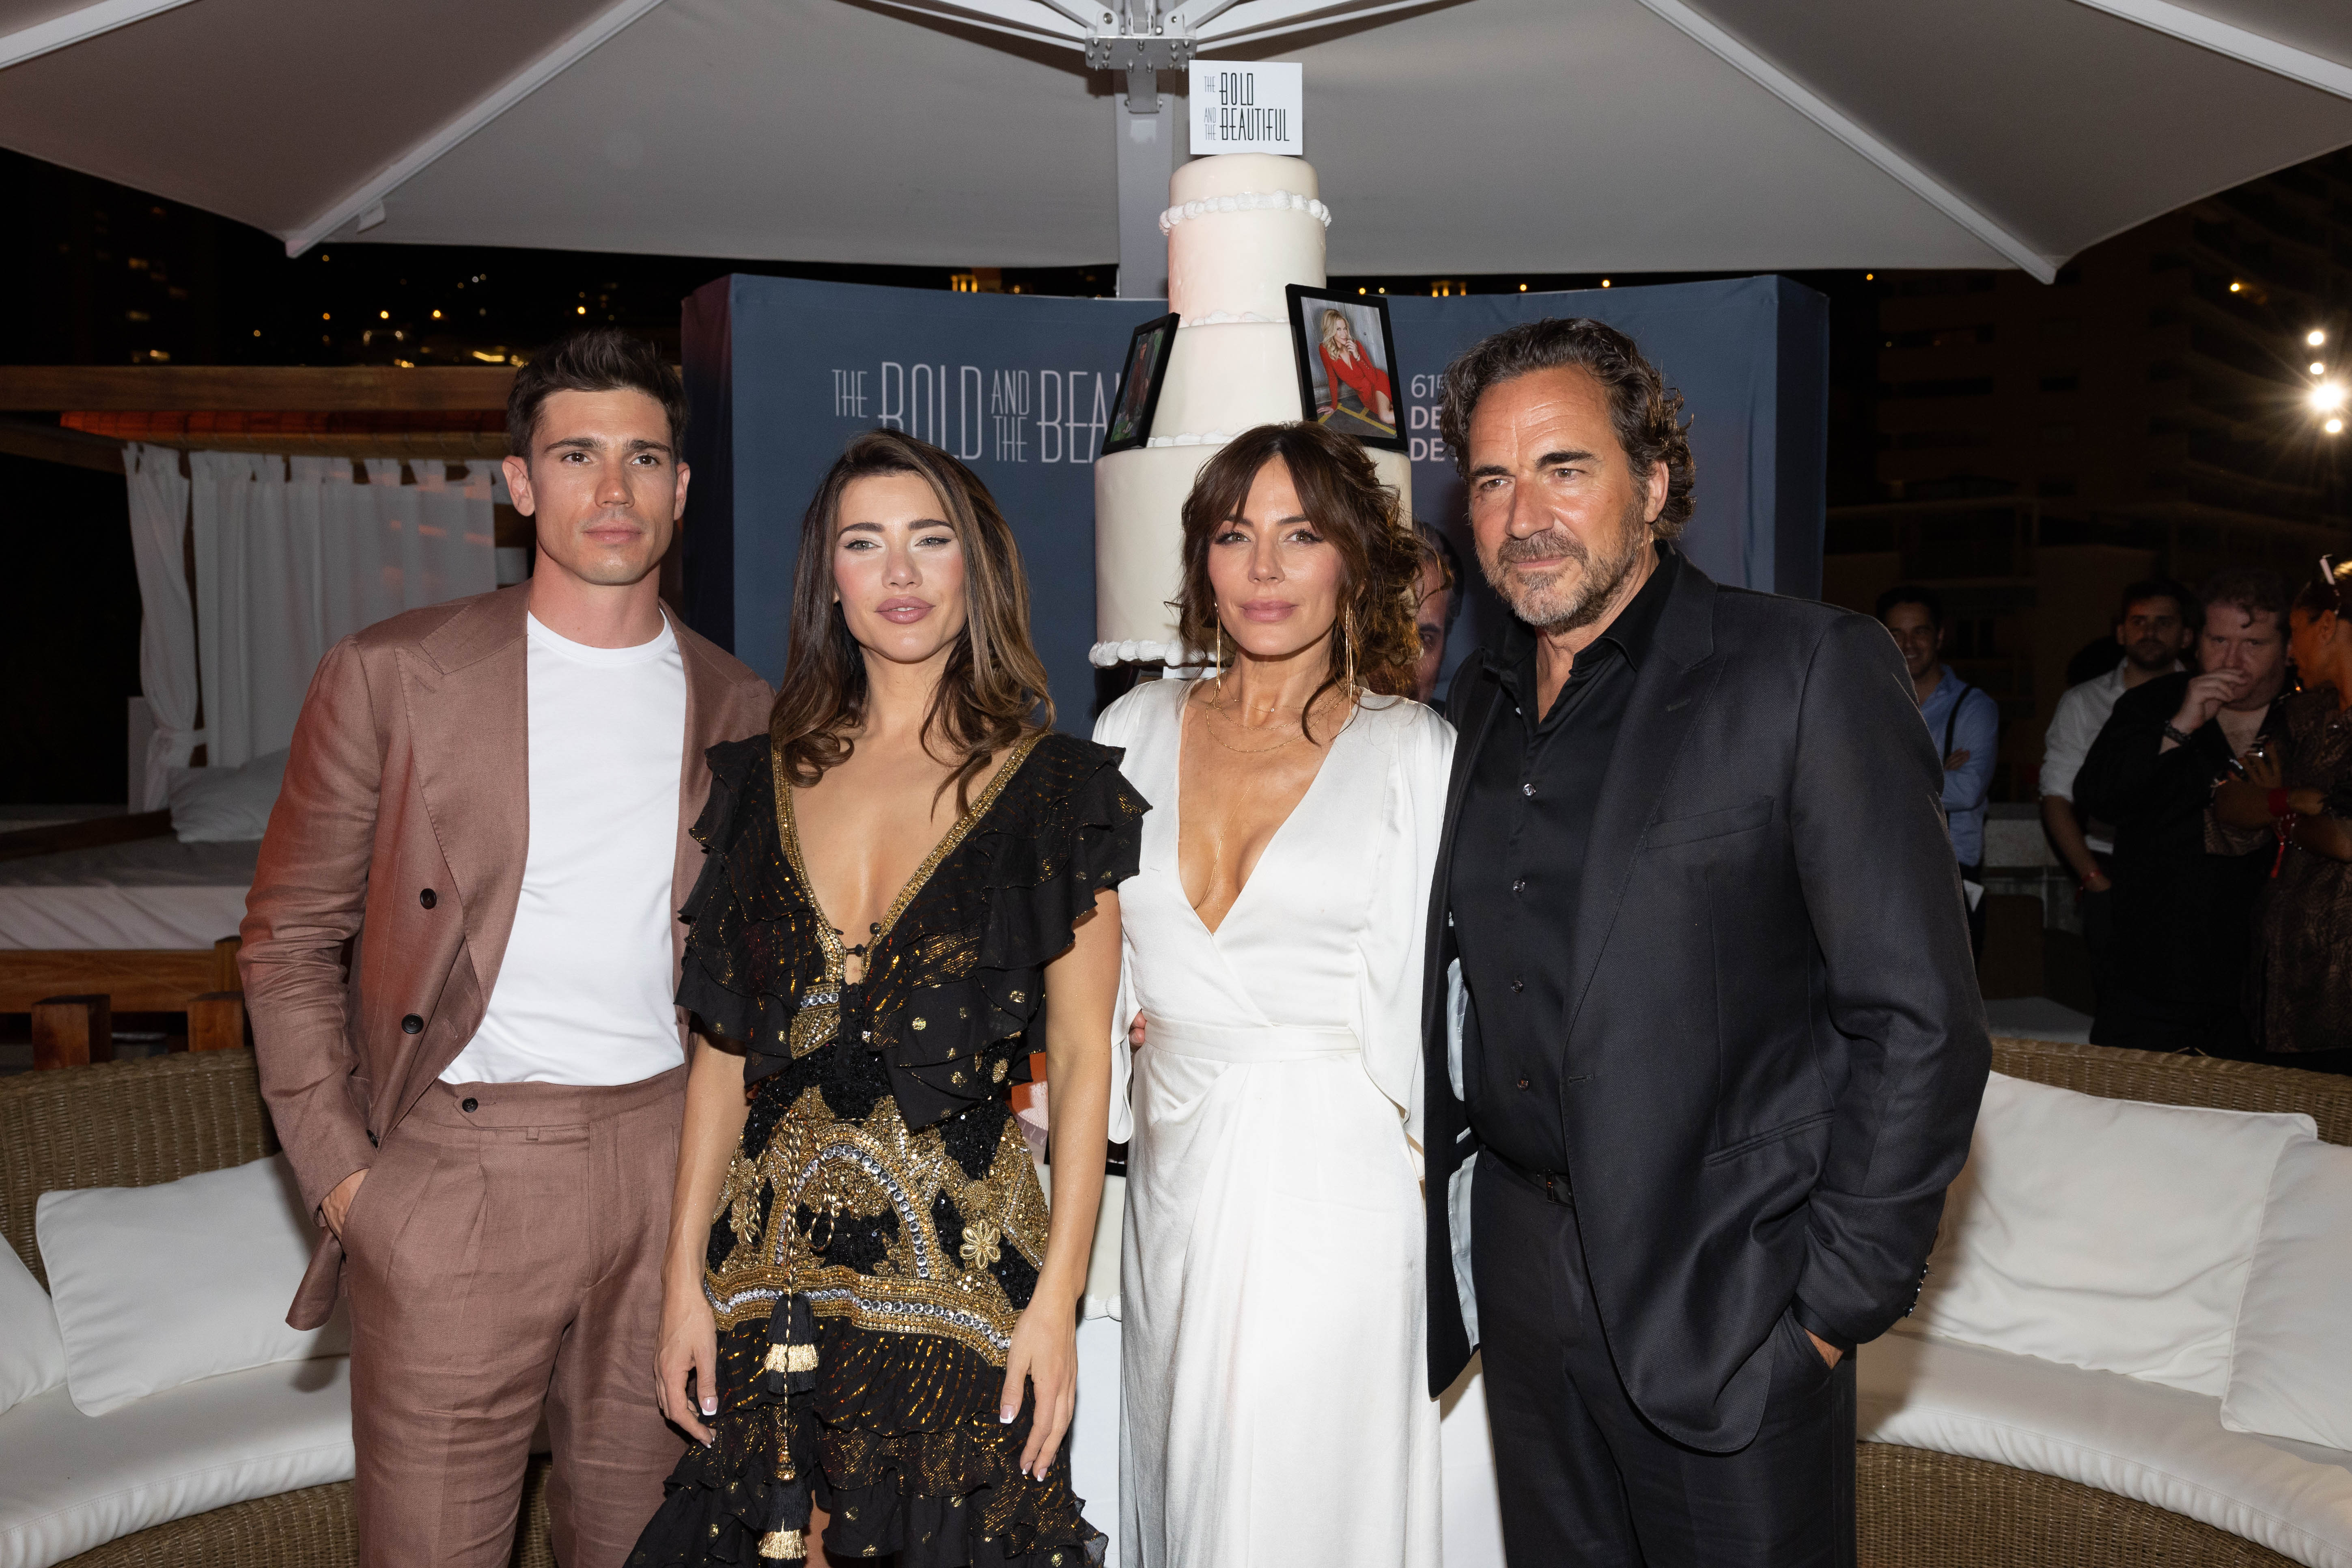 'The Bold and the Beautiful' stars Tanner Novlan, Jacqueline MacInnes Wood, Krista Allen, and Thorsten Kaye pose for a group photo.